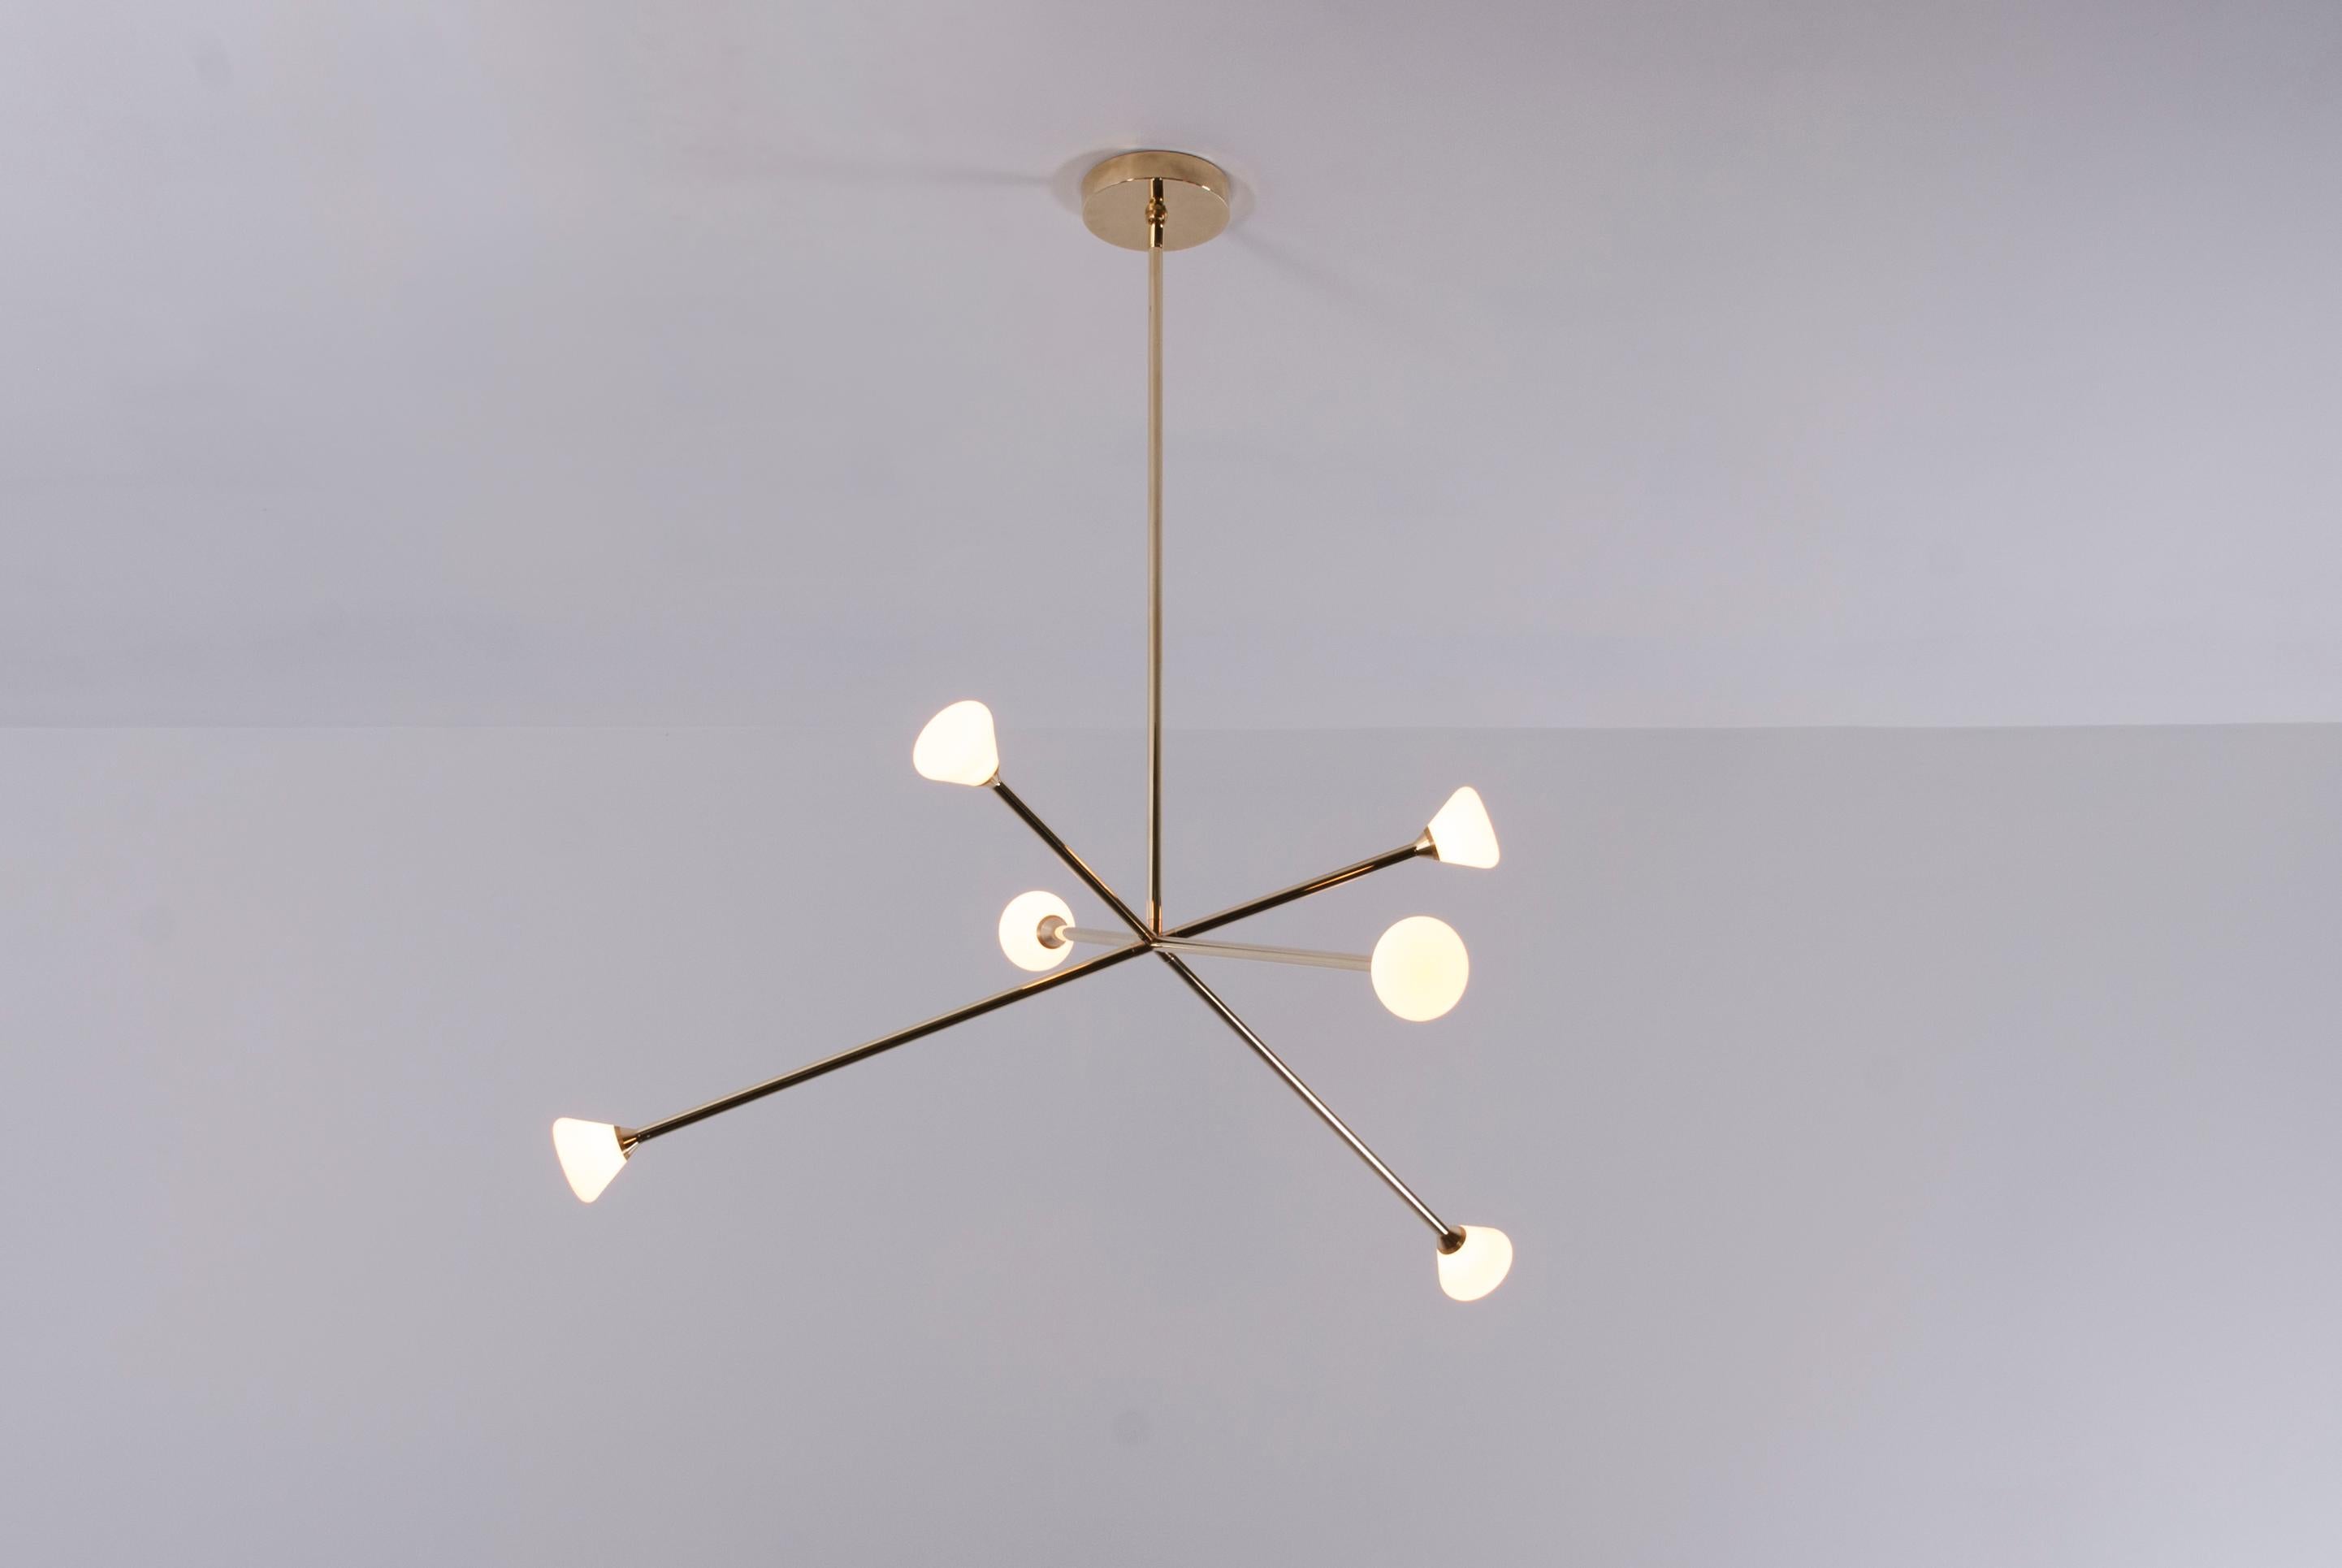 The Nova chandelier is centerpiece fixture with an elegant and energetic composition. This contemporary chandelier branches out from a central point in a pure, geometric manner. It features six white glass shades that house powerful, dimmable LED's.